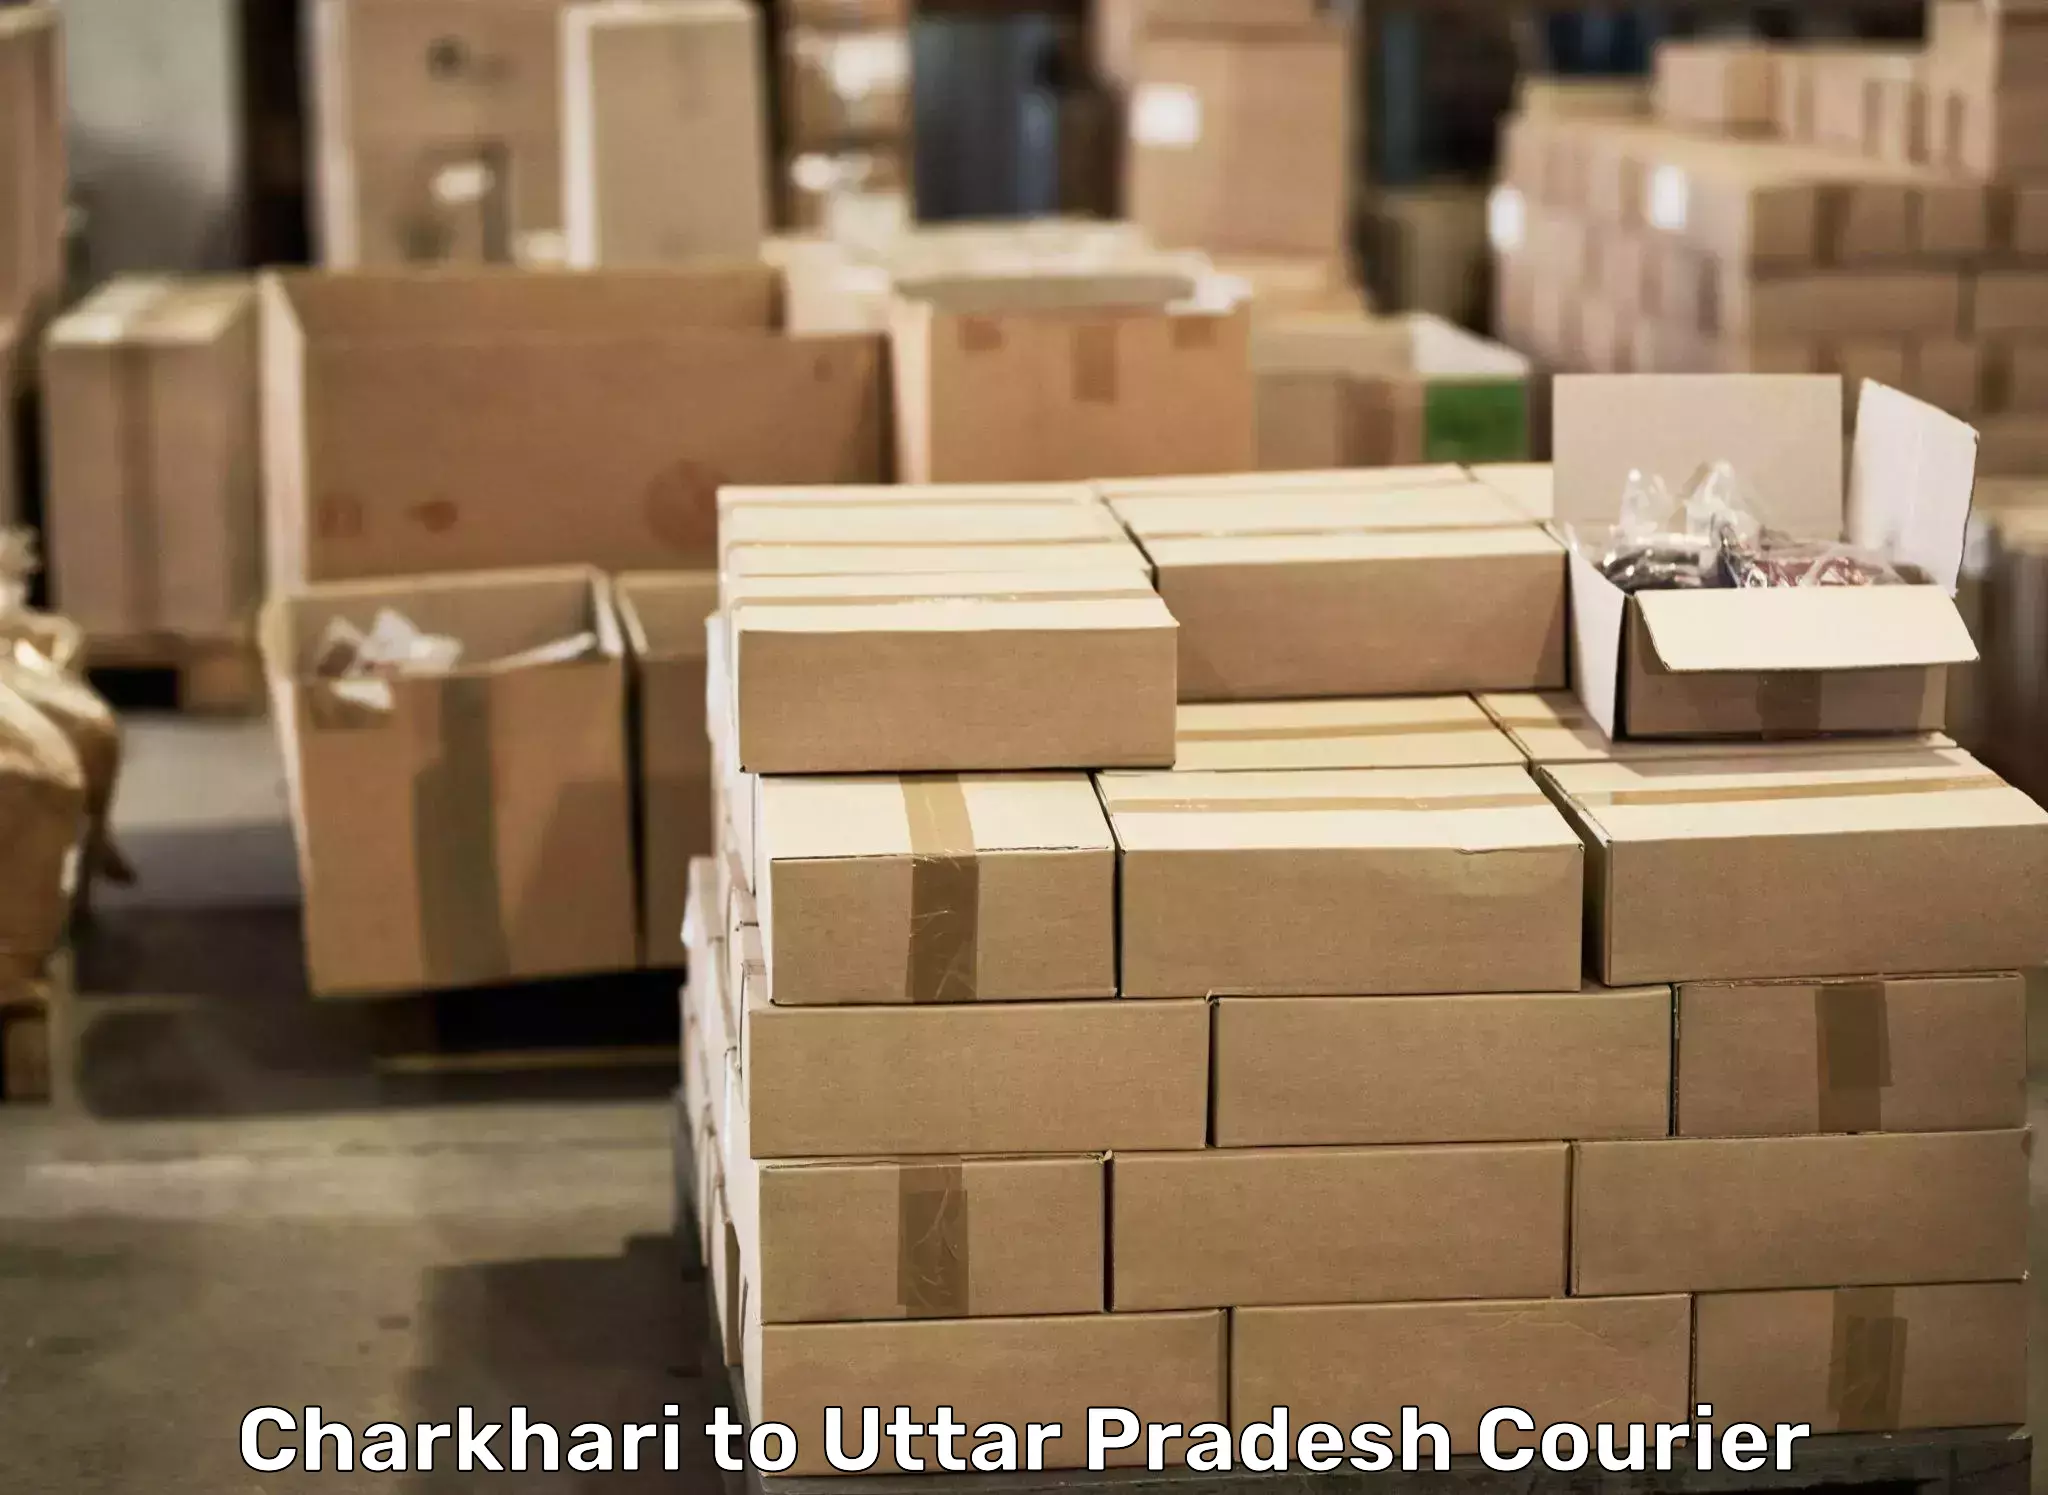 Trusted relocation services in Charkhari to Bighapur